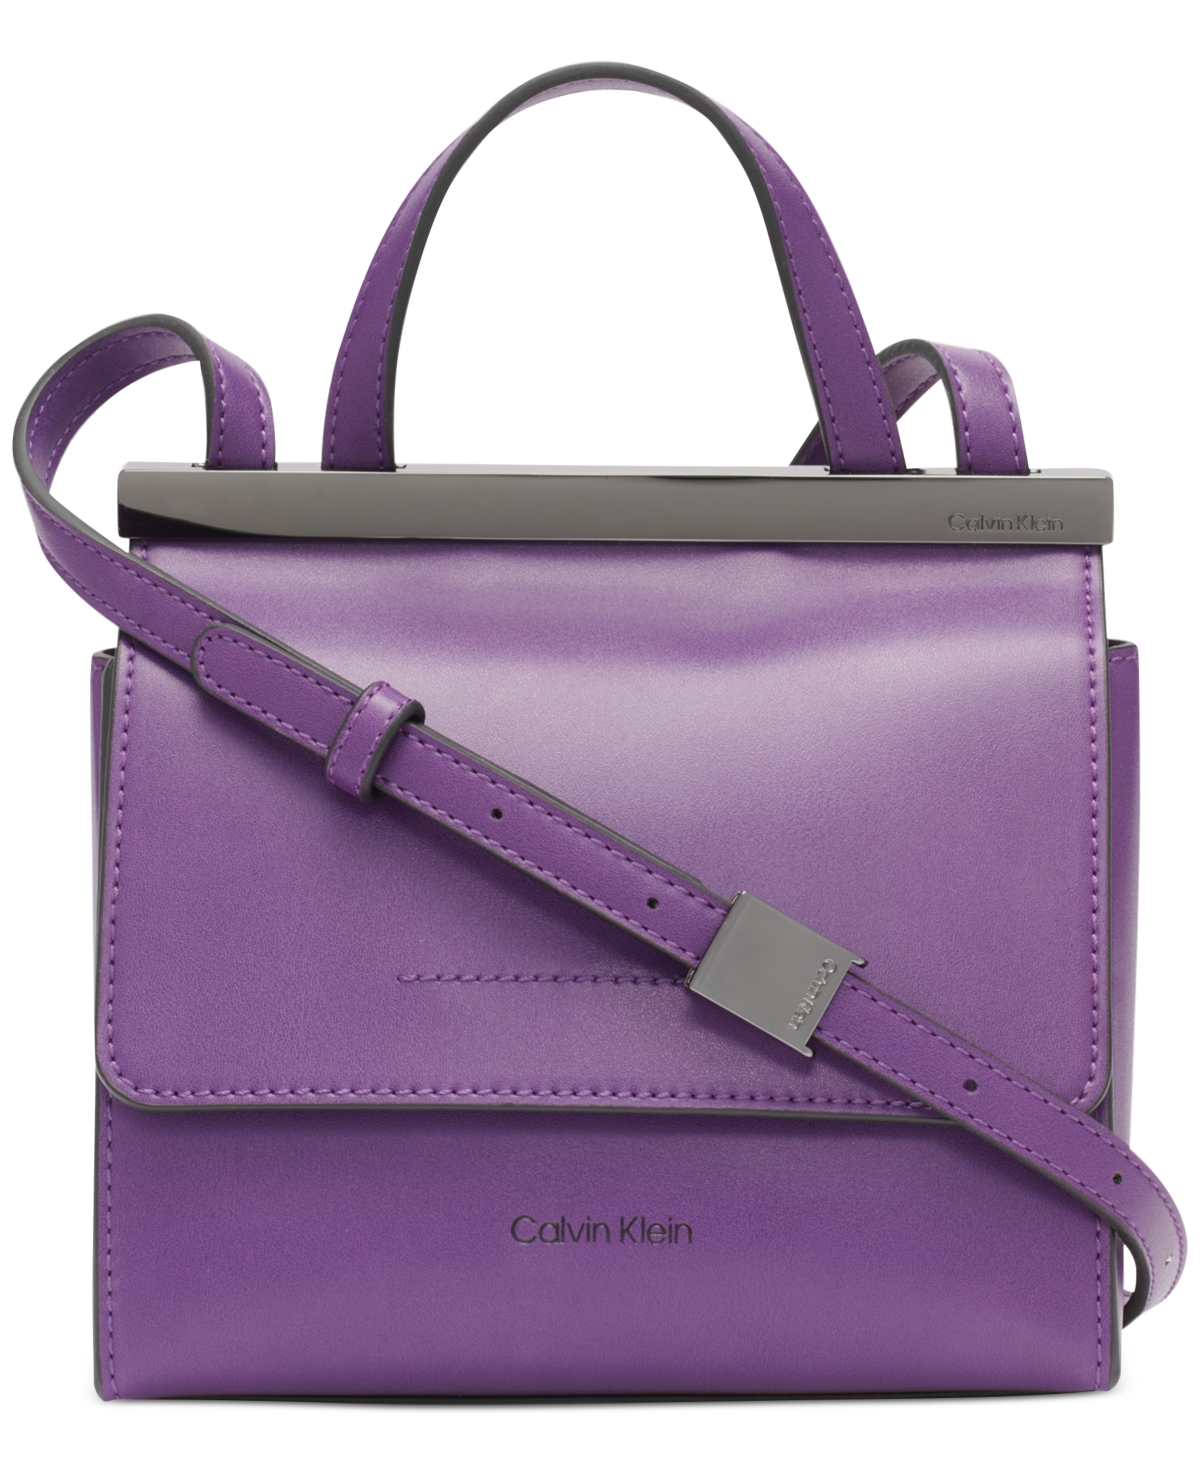 Calvin Klein Coral Flap Crossbody With Adjustable Strap In Grape